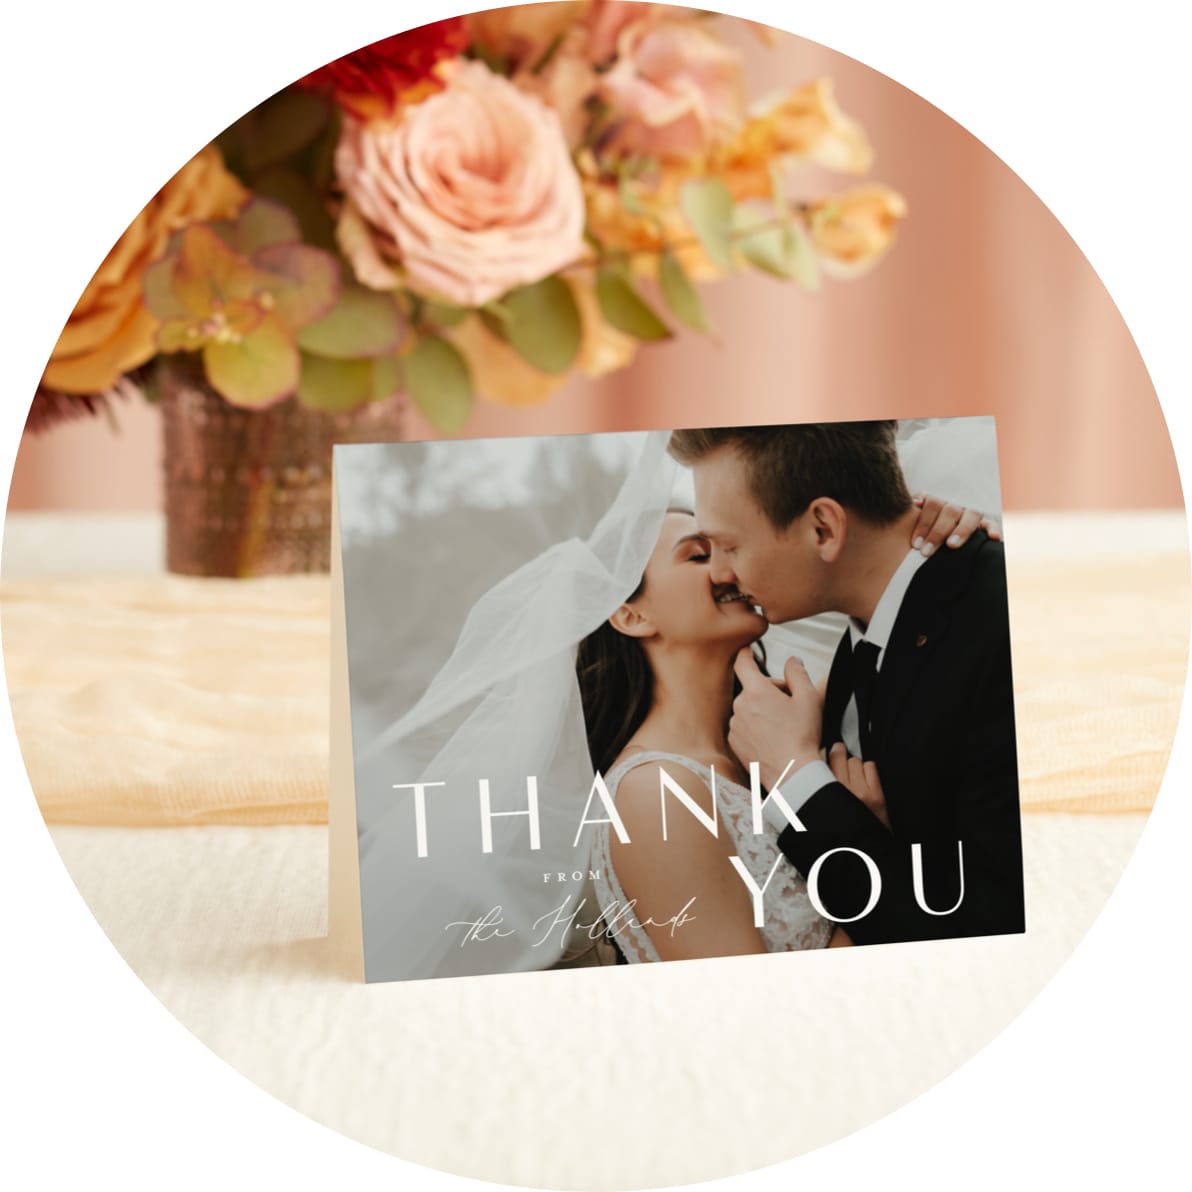 Shop Thank You Cards